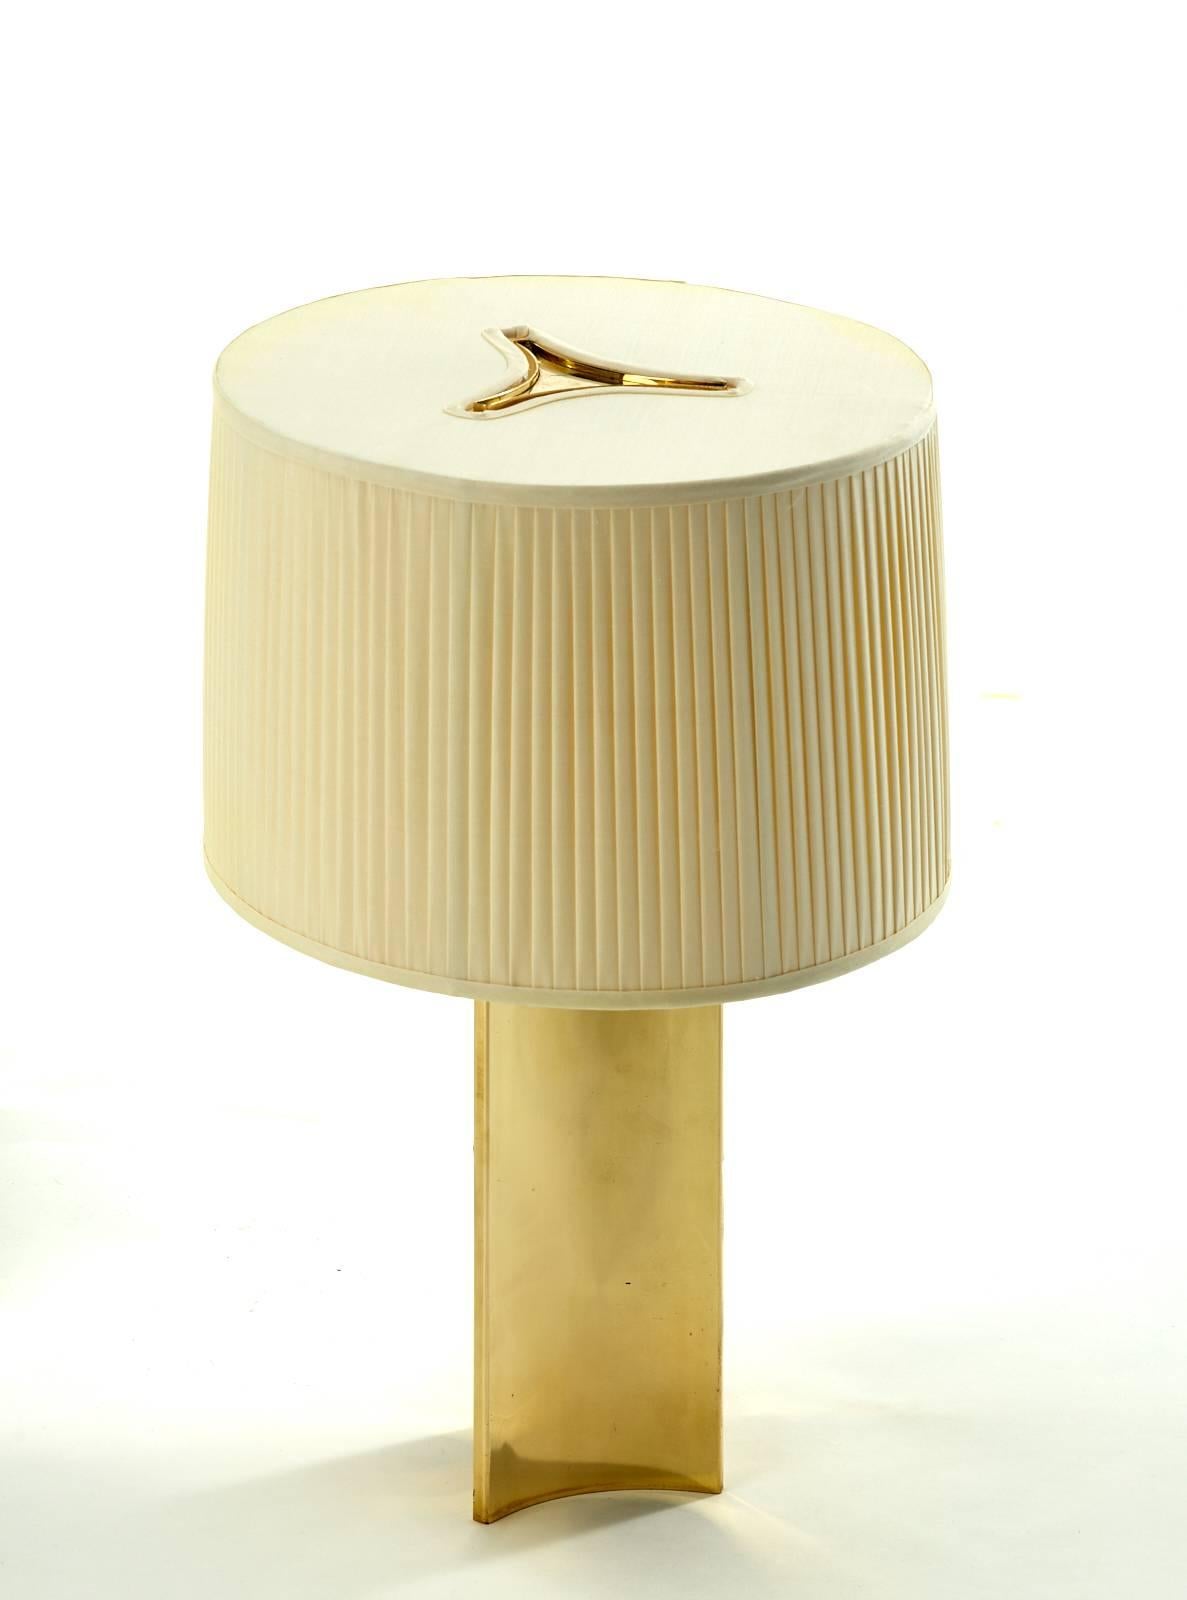 Rare pair of Paavo Tynell table lamps, Taito Oy

Finland, circa 1945

Measures: 14 D x 22 H in (36 x 56 cm) 
Pleated silk shade, contoured brass base.

Signed with impressed manufacturer's mark to underside of base: [Taito AB 546 D Made in